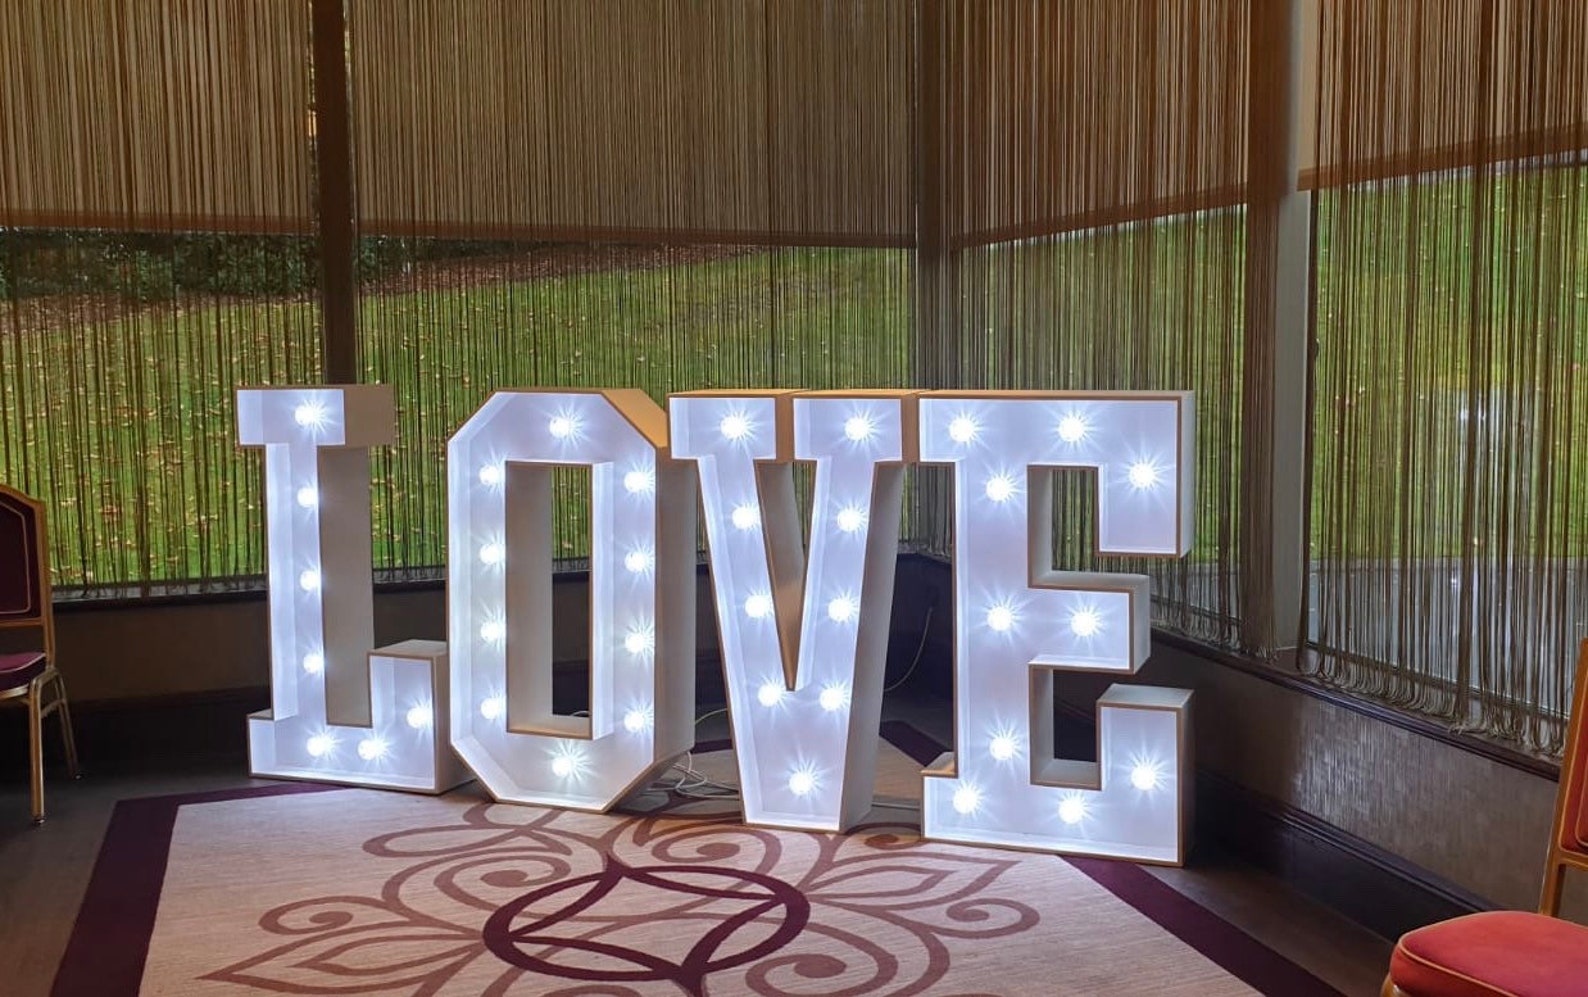 4ft Marquee Letters LOVE Light up Letters Wedding Decor Etsy UK